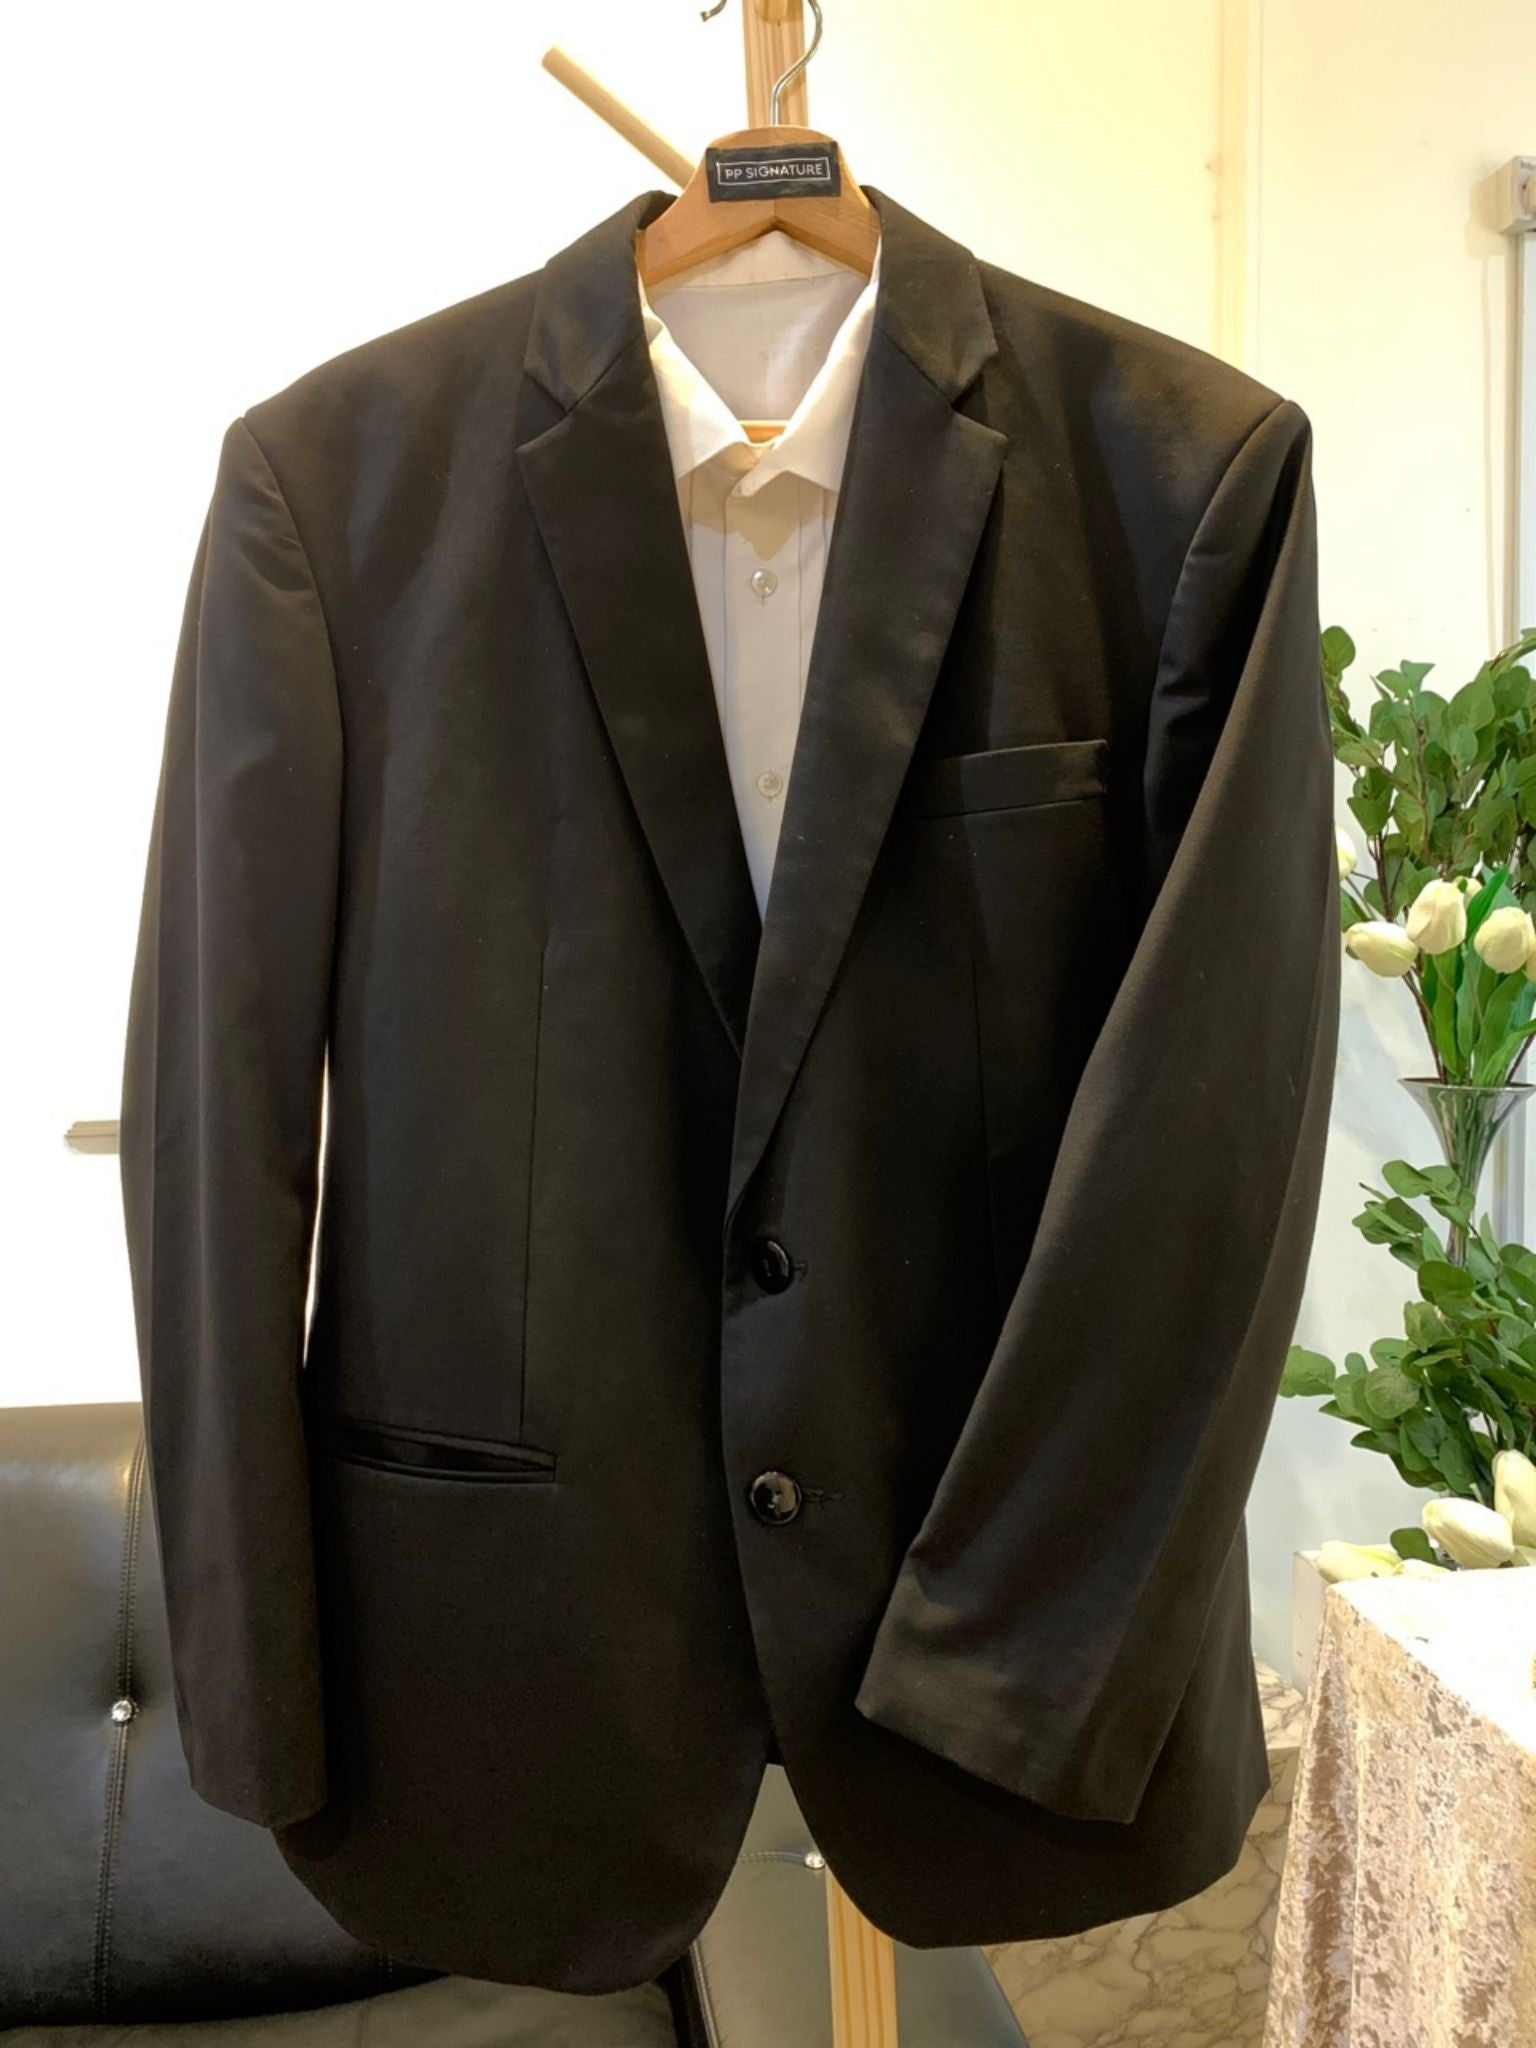 A close-up image of a black wedding suit with a notch lapel. The suit is made from high-quality wool fabric and is fully lined for a comfortable fit. It is the perfect choice for a formal occasion, such as a wedding or black tie gala.